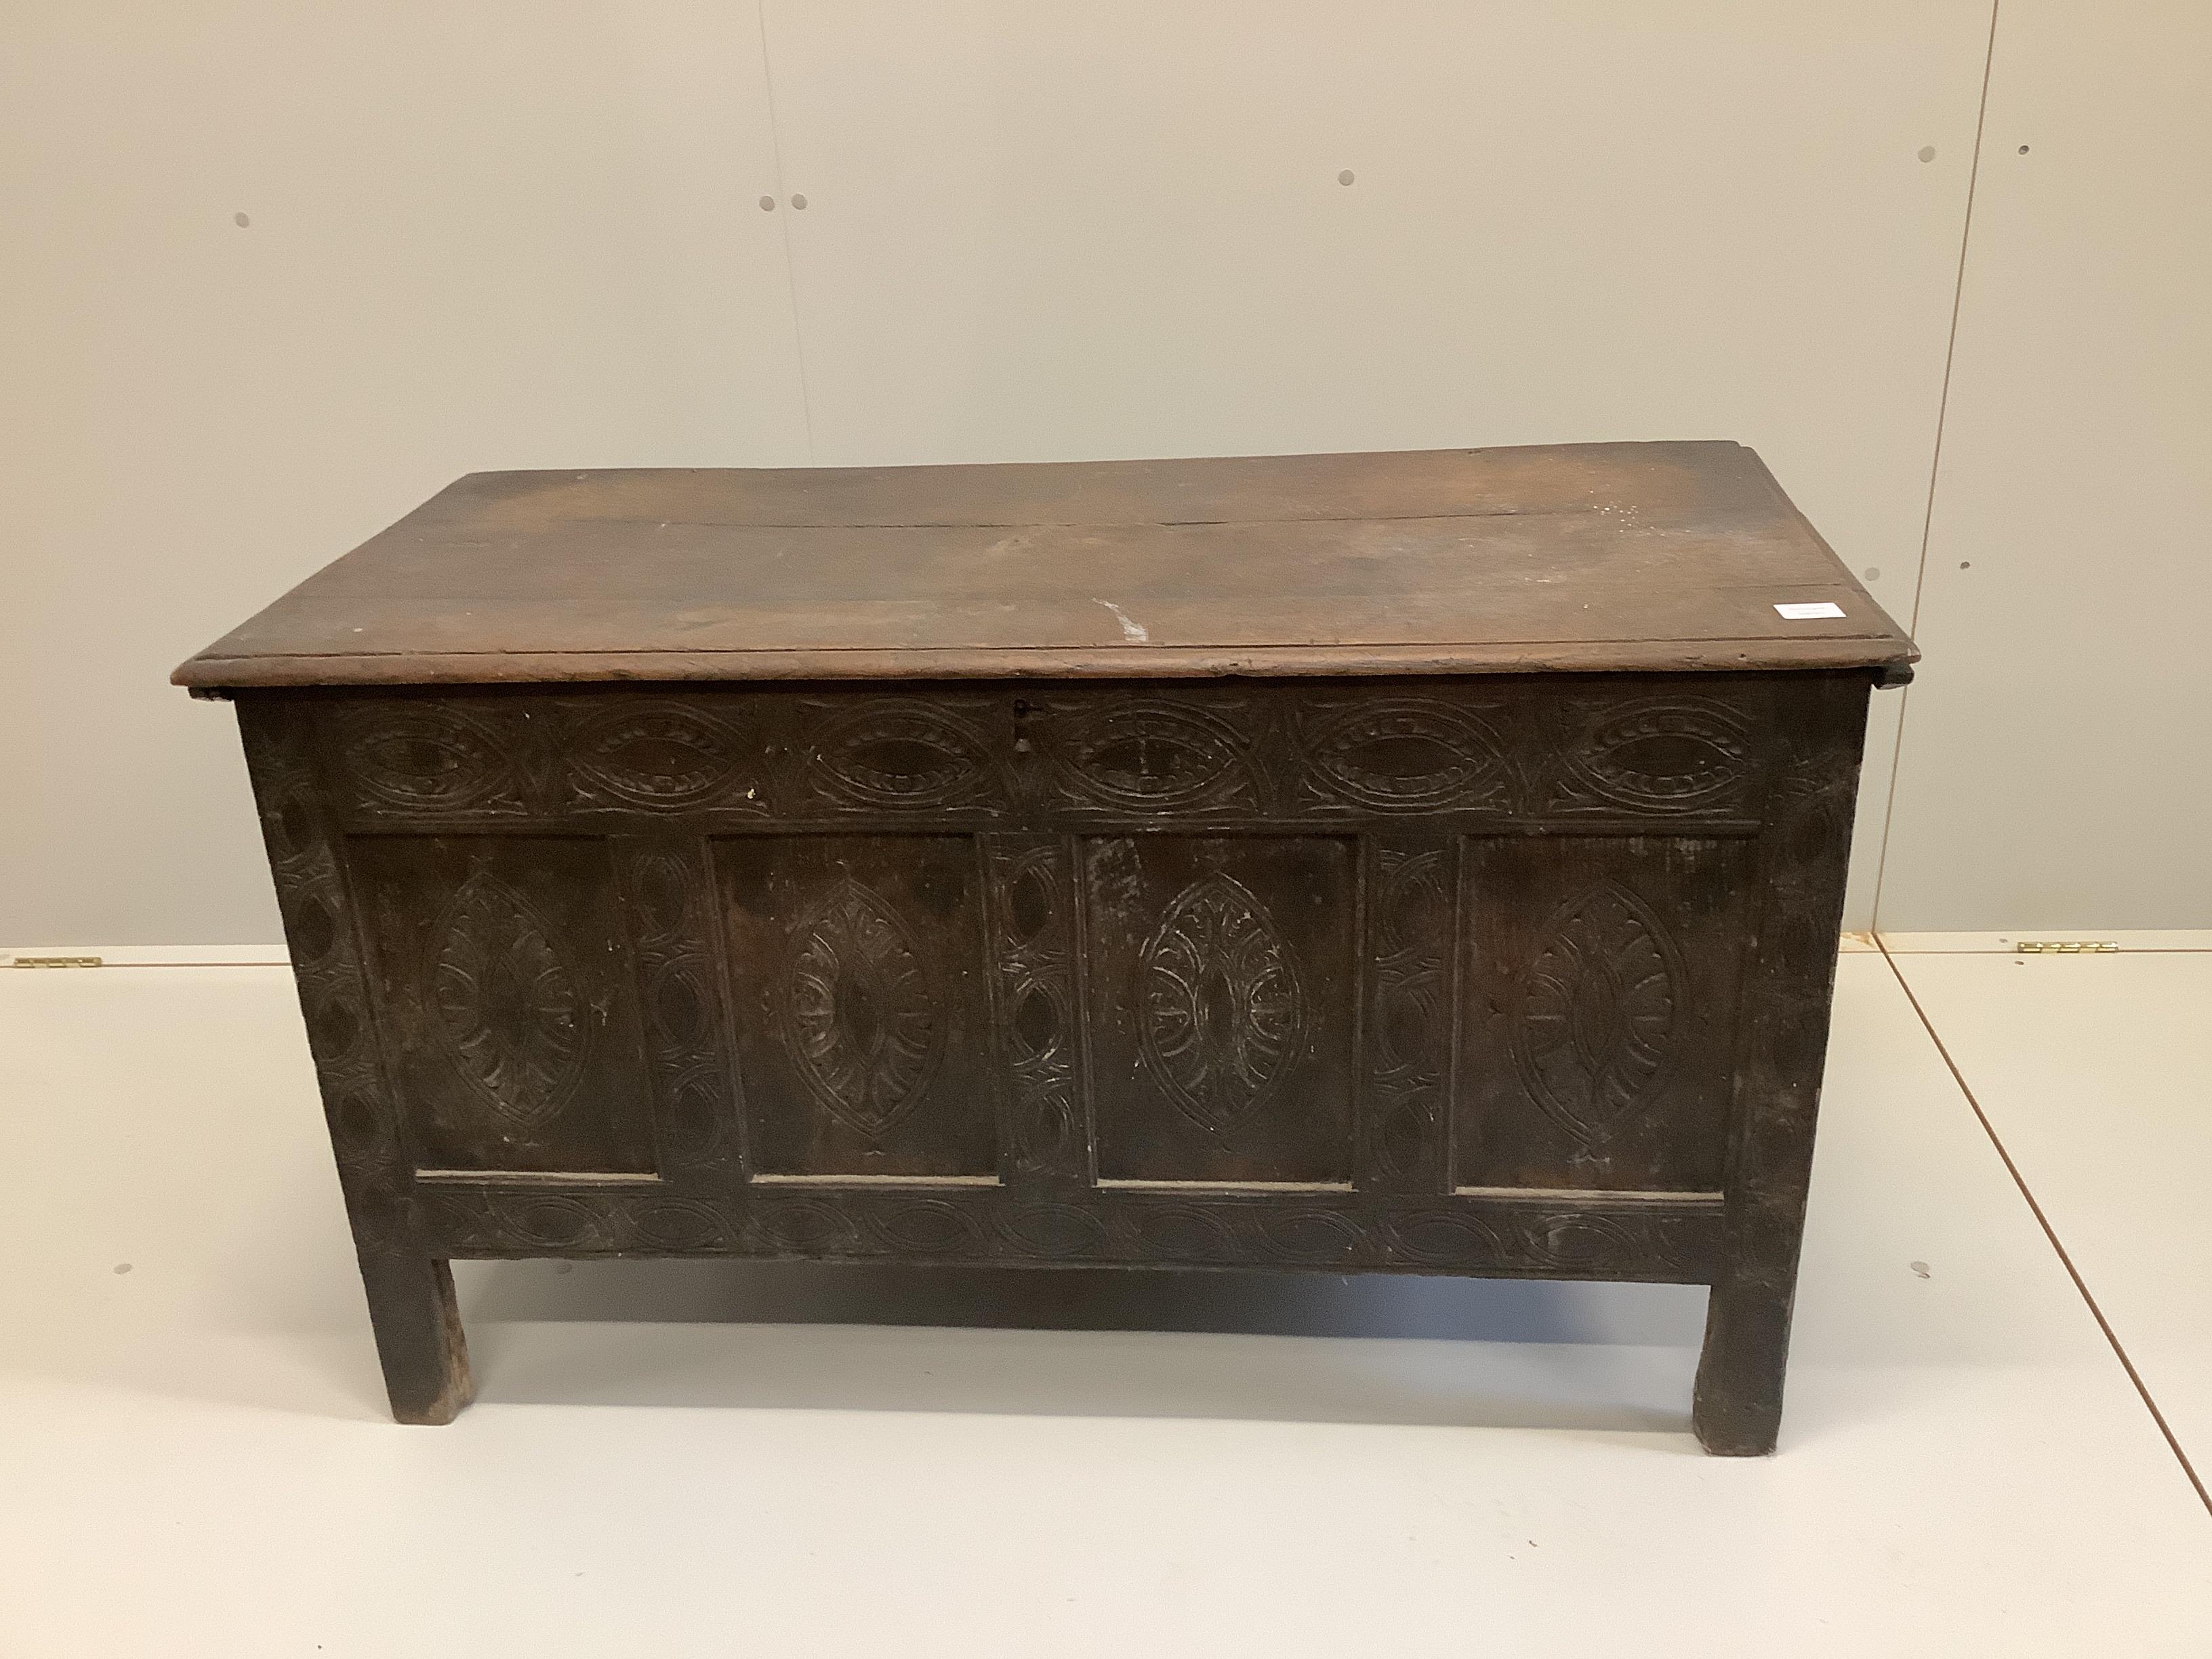 A 17th / 18th century West Country panelled oak coffer, width 122cm, depth 55cm, height 71cm